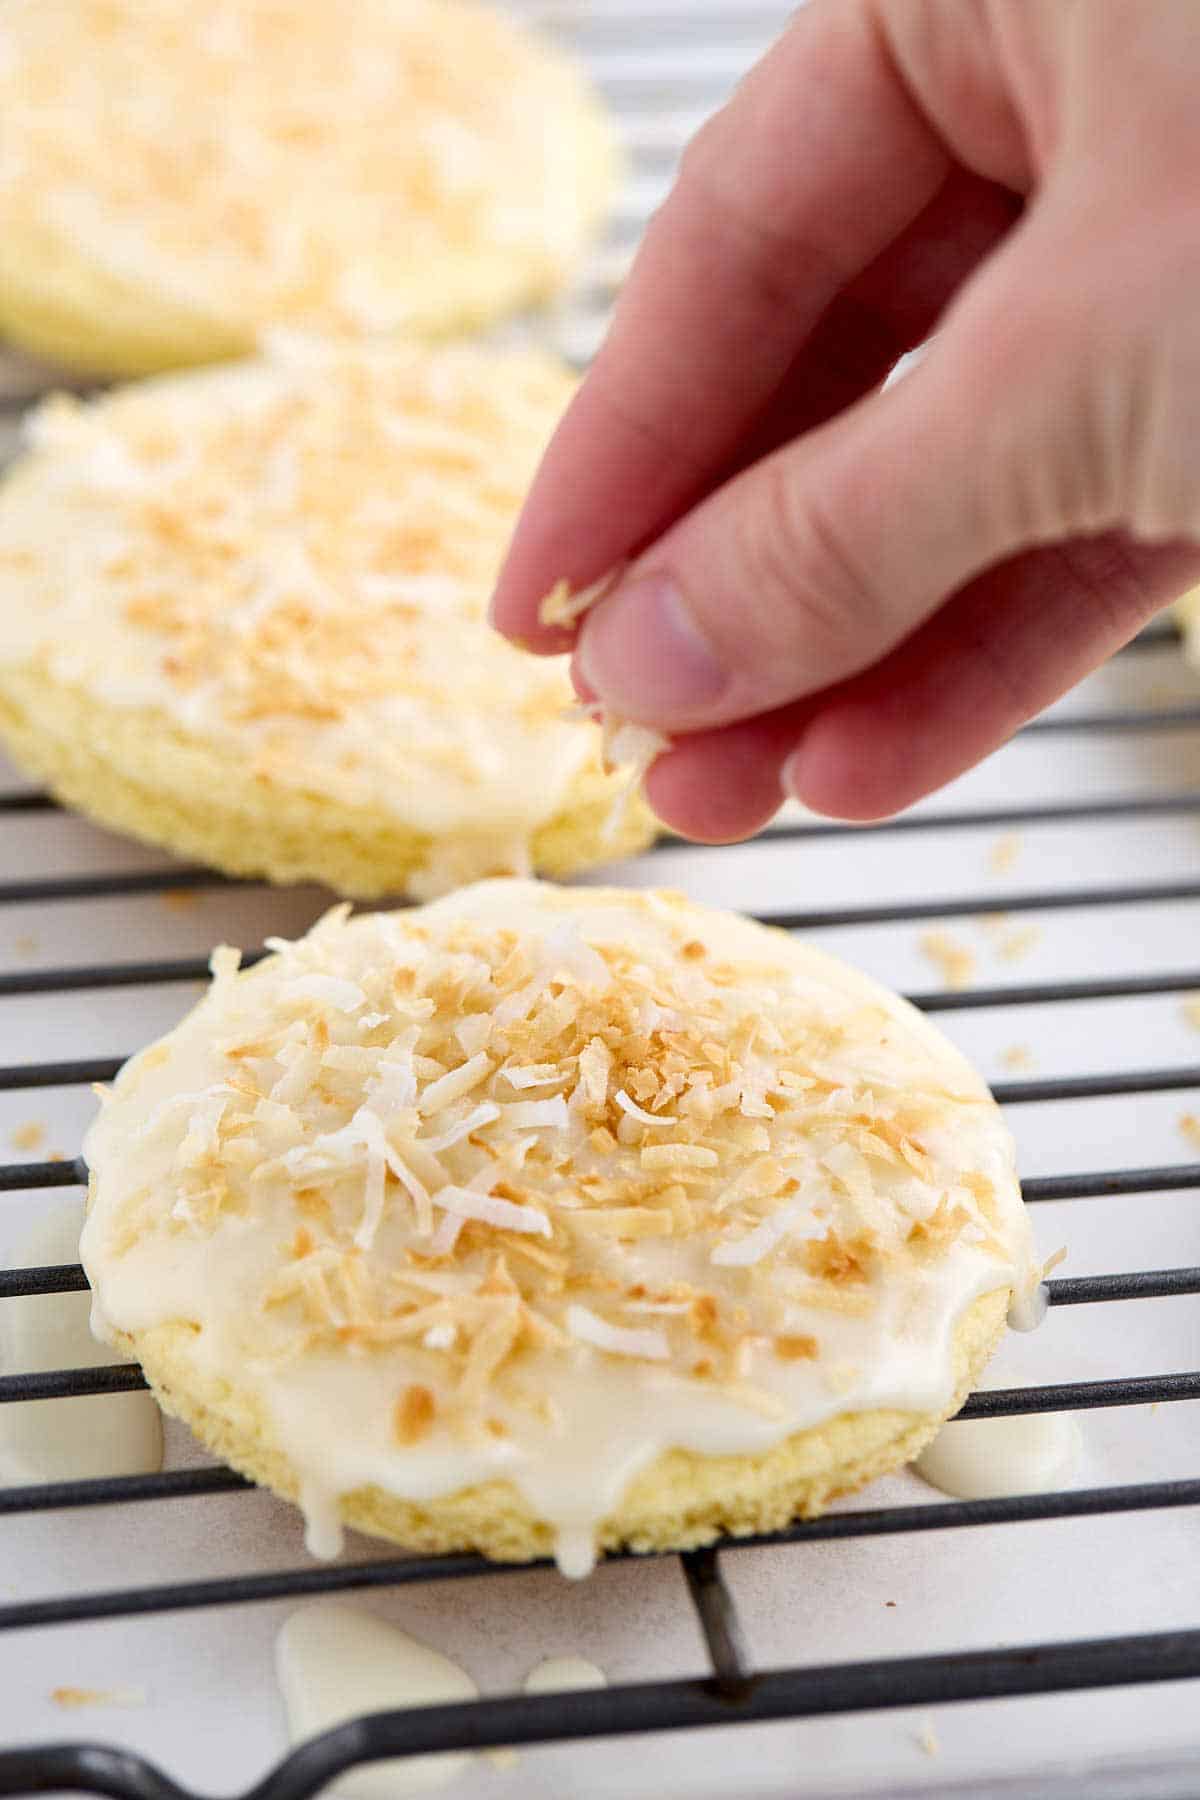 Fingers dropping toasted coconut on the glazed pineapple cookie.